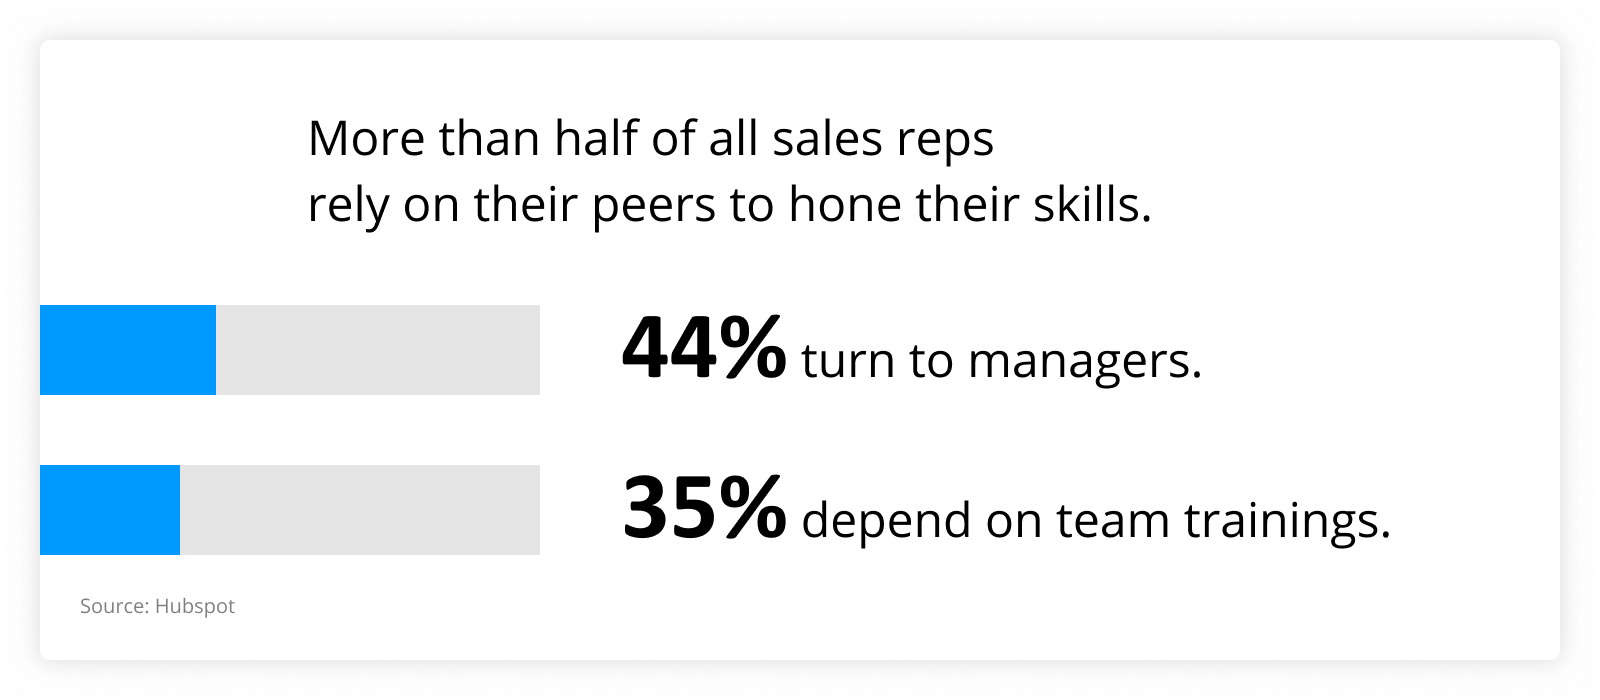 graph showing that More than half of all sales reps rely on their peers to hone their skills